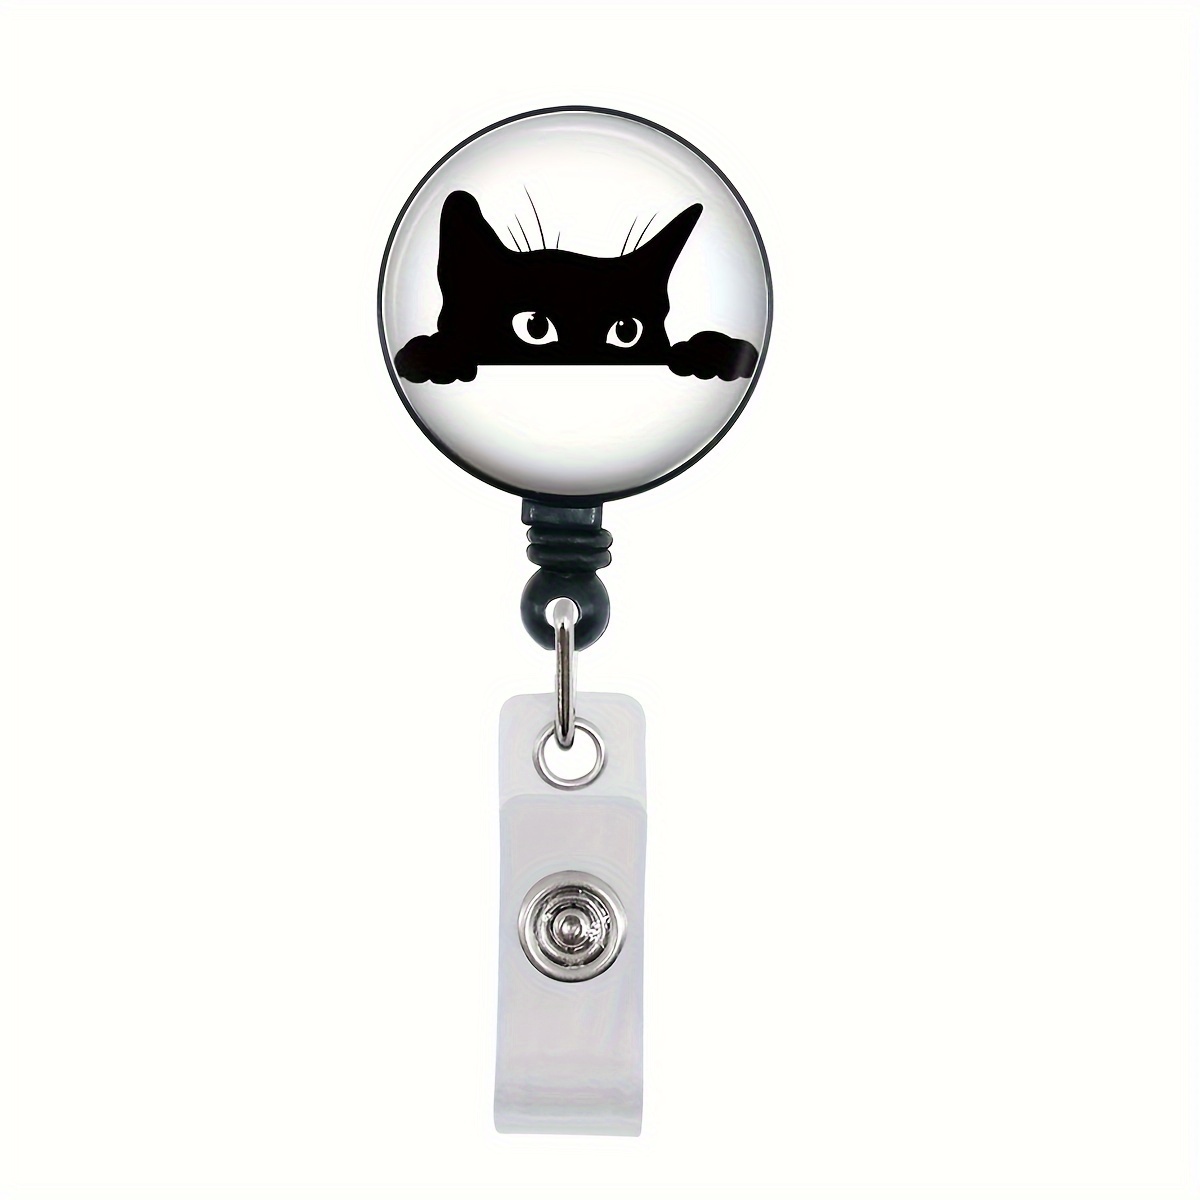 Black,Flower,Cat Is Looking at You Badge Reel, Retractable Name Card Badge Holder with Alligator Clip, 24in Nylon Cord, Medical MD Rn Nurse Badge